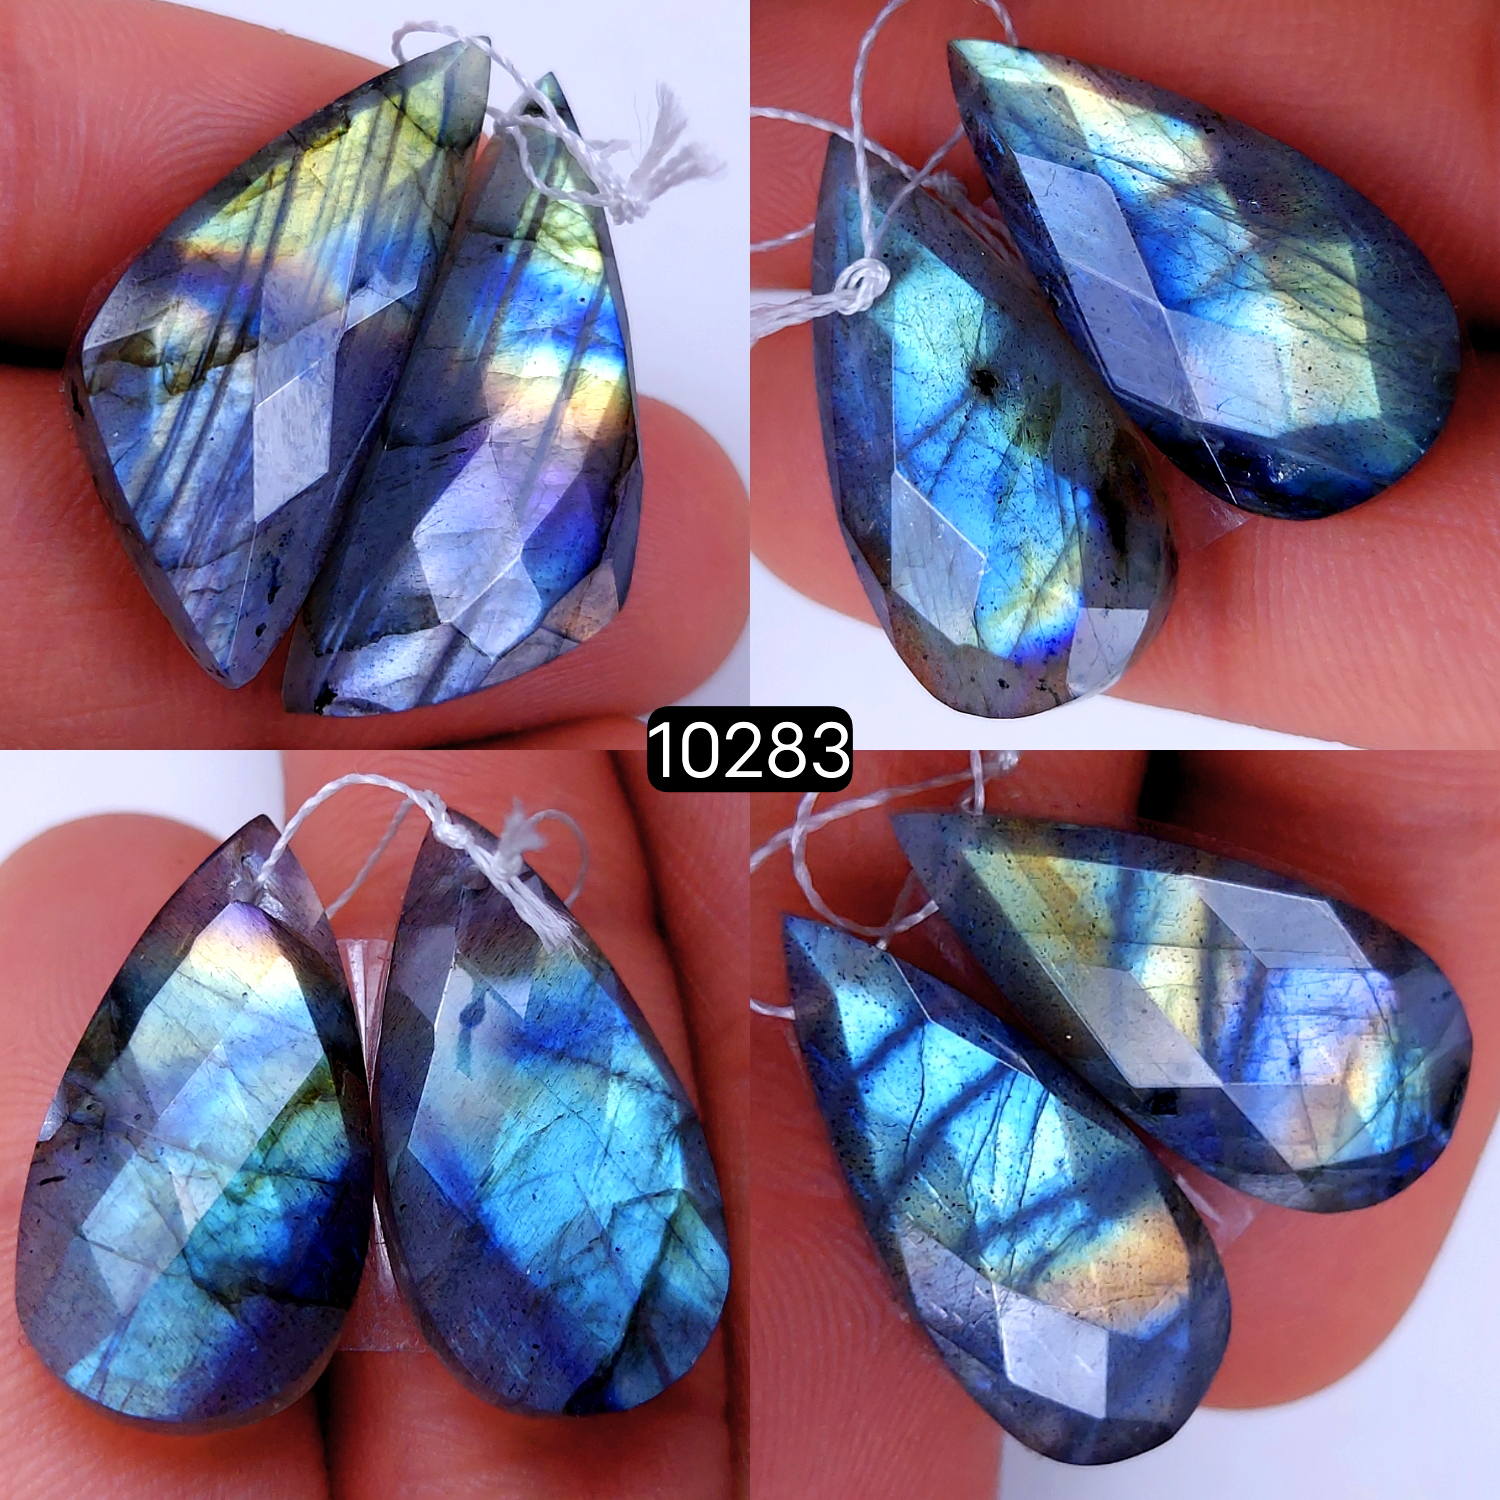 4Pair 114Cts Natural Labradorite Faceted Crystal Drill Dangle Drop Earring Pairs Silver Earrings Rose cut Labradorite Hoop Jewelry  30X14 24X10mm #10283